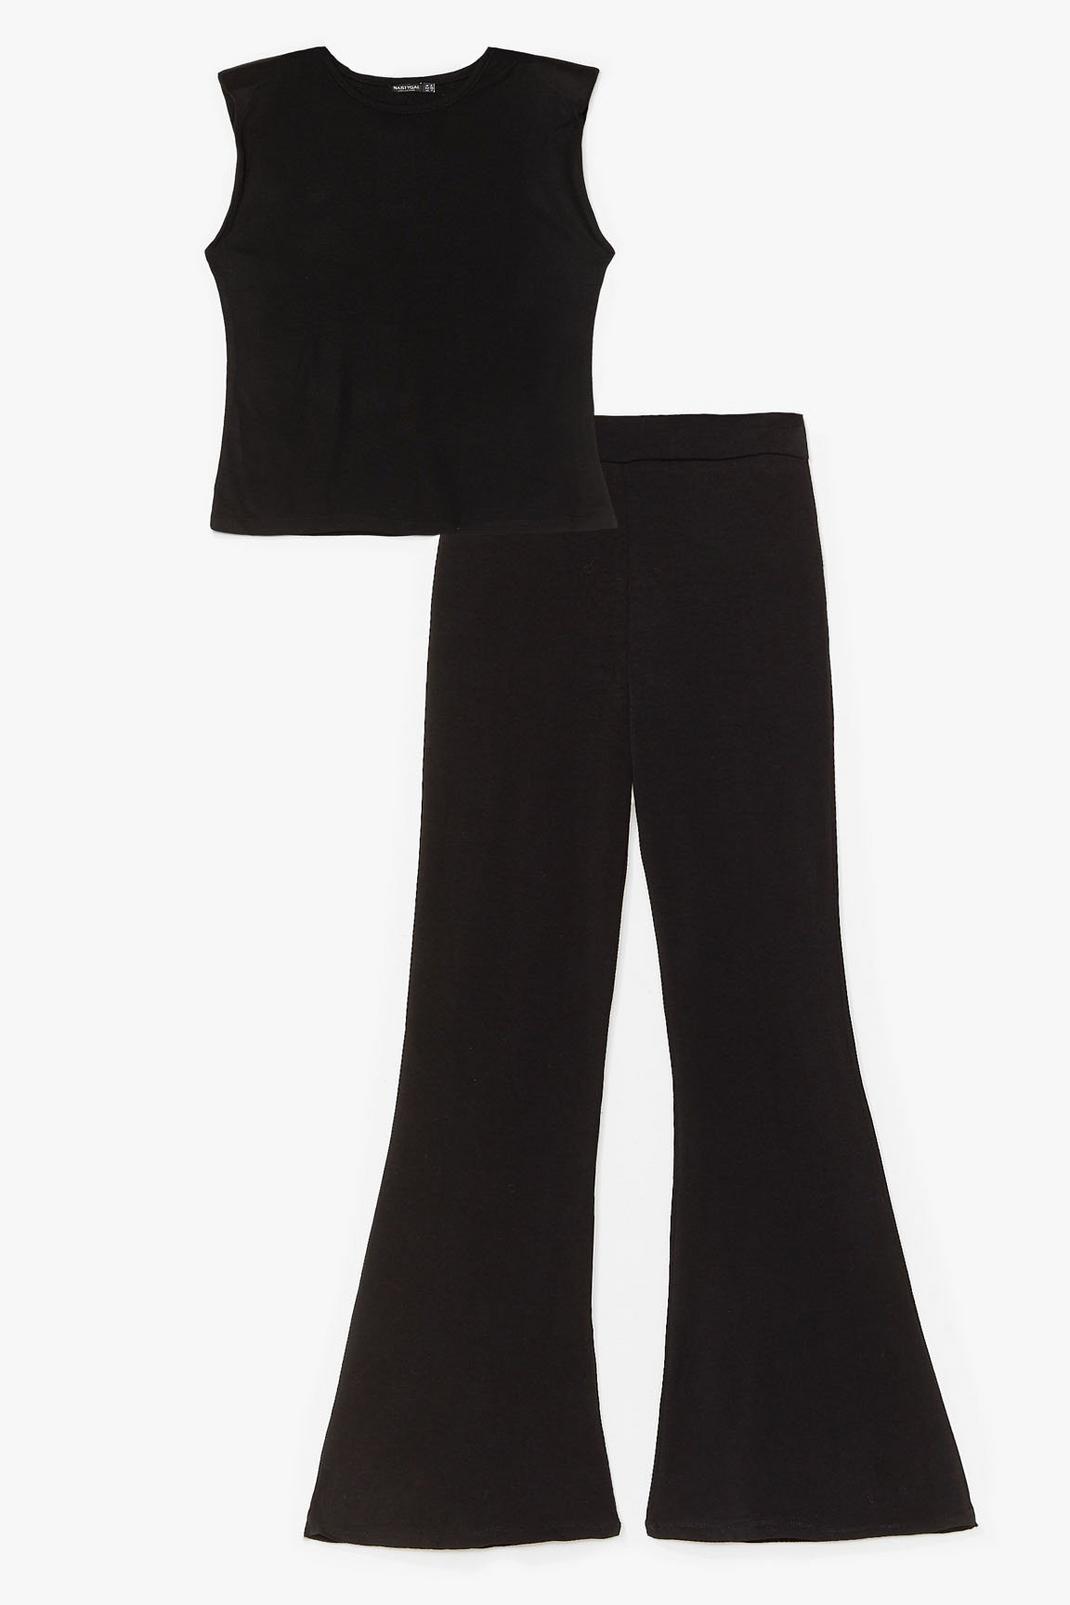 We Could Be Together Top and Flare Trousers Set image number 1